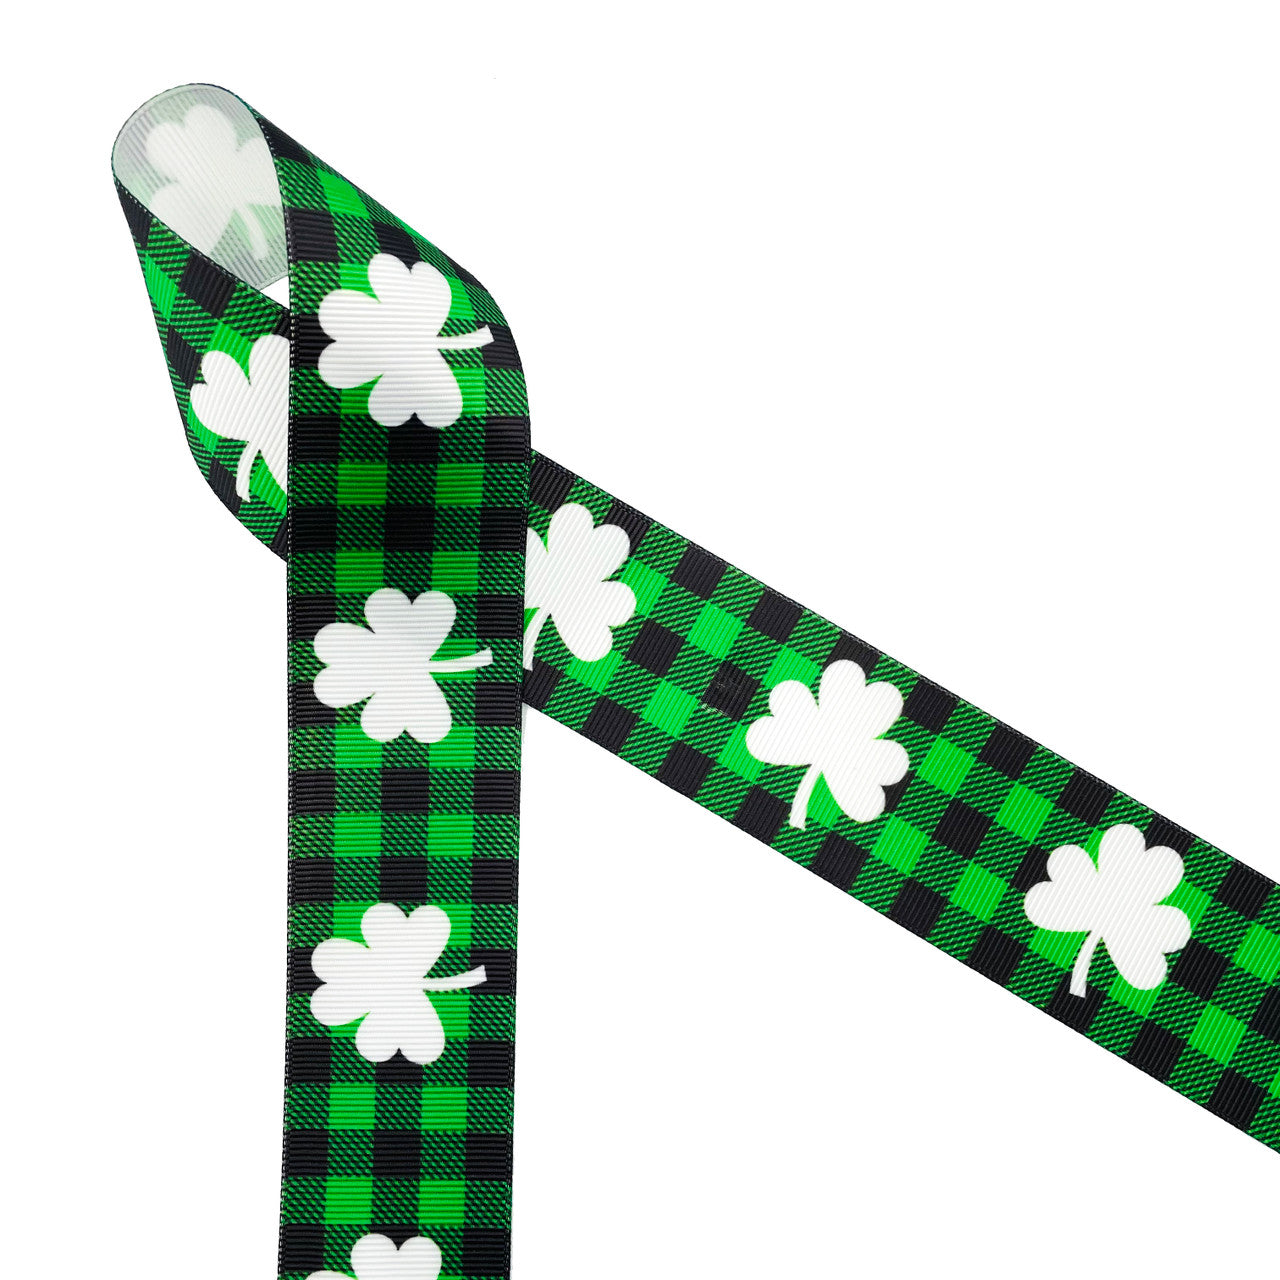 May the luck of the Irish be with everyone on St. Patrick's Day! White clovers on a green and black buffalo plaid background printed on 1.5" grosgrain satin ribbon is the perfect ribbon for St. Patrick's Day gift wrap, gift baskets, party decor, table decor, floral designs and crafts. This is a great ribbon for wreath making, sewing and quilting projects too. All our ribbon is designed and printed in the USA